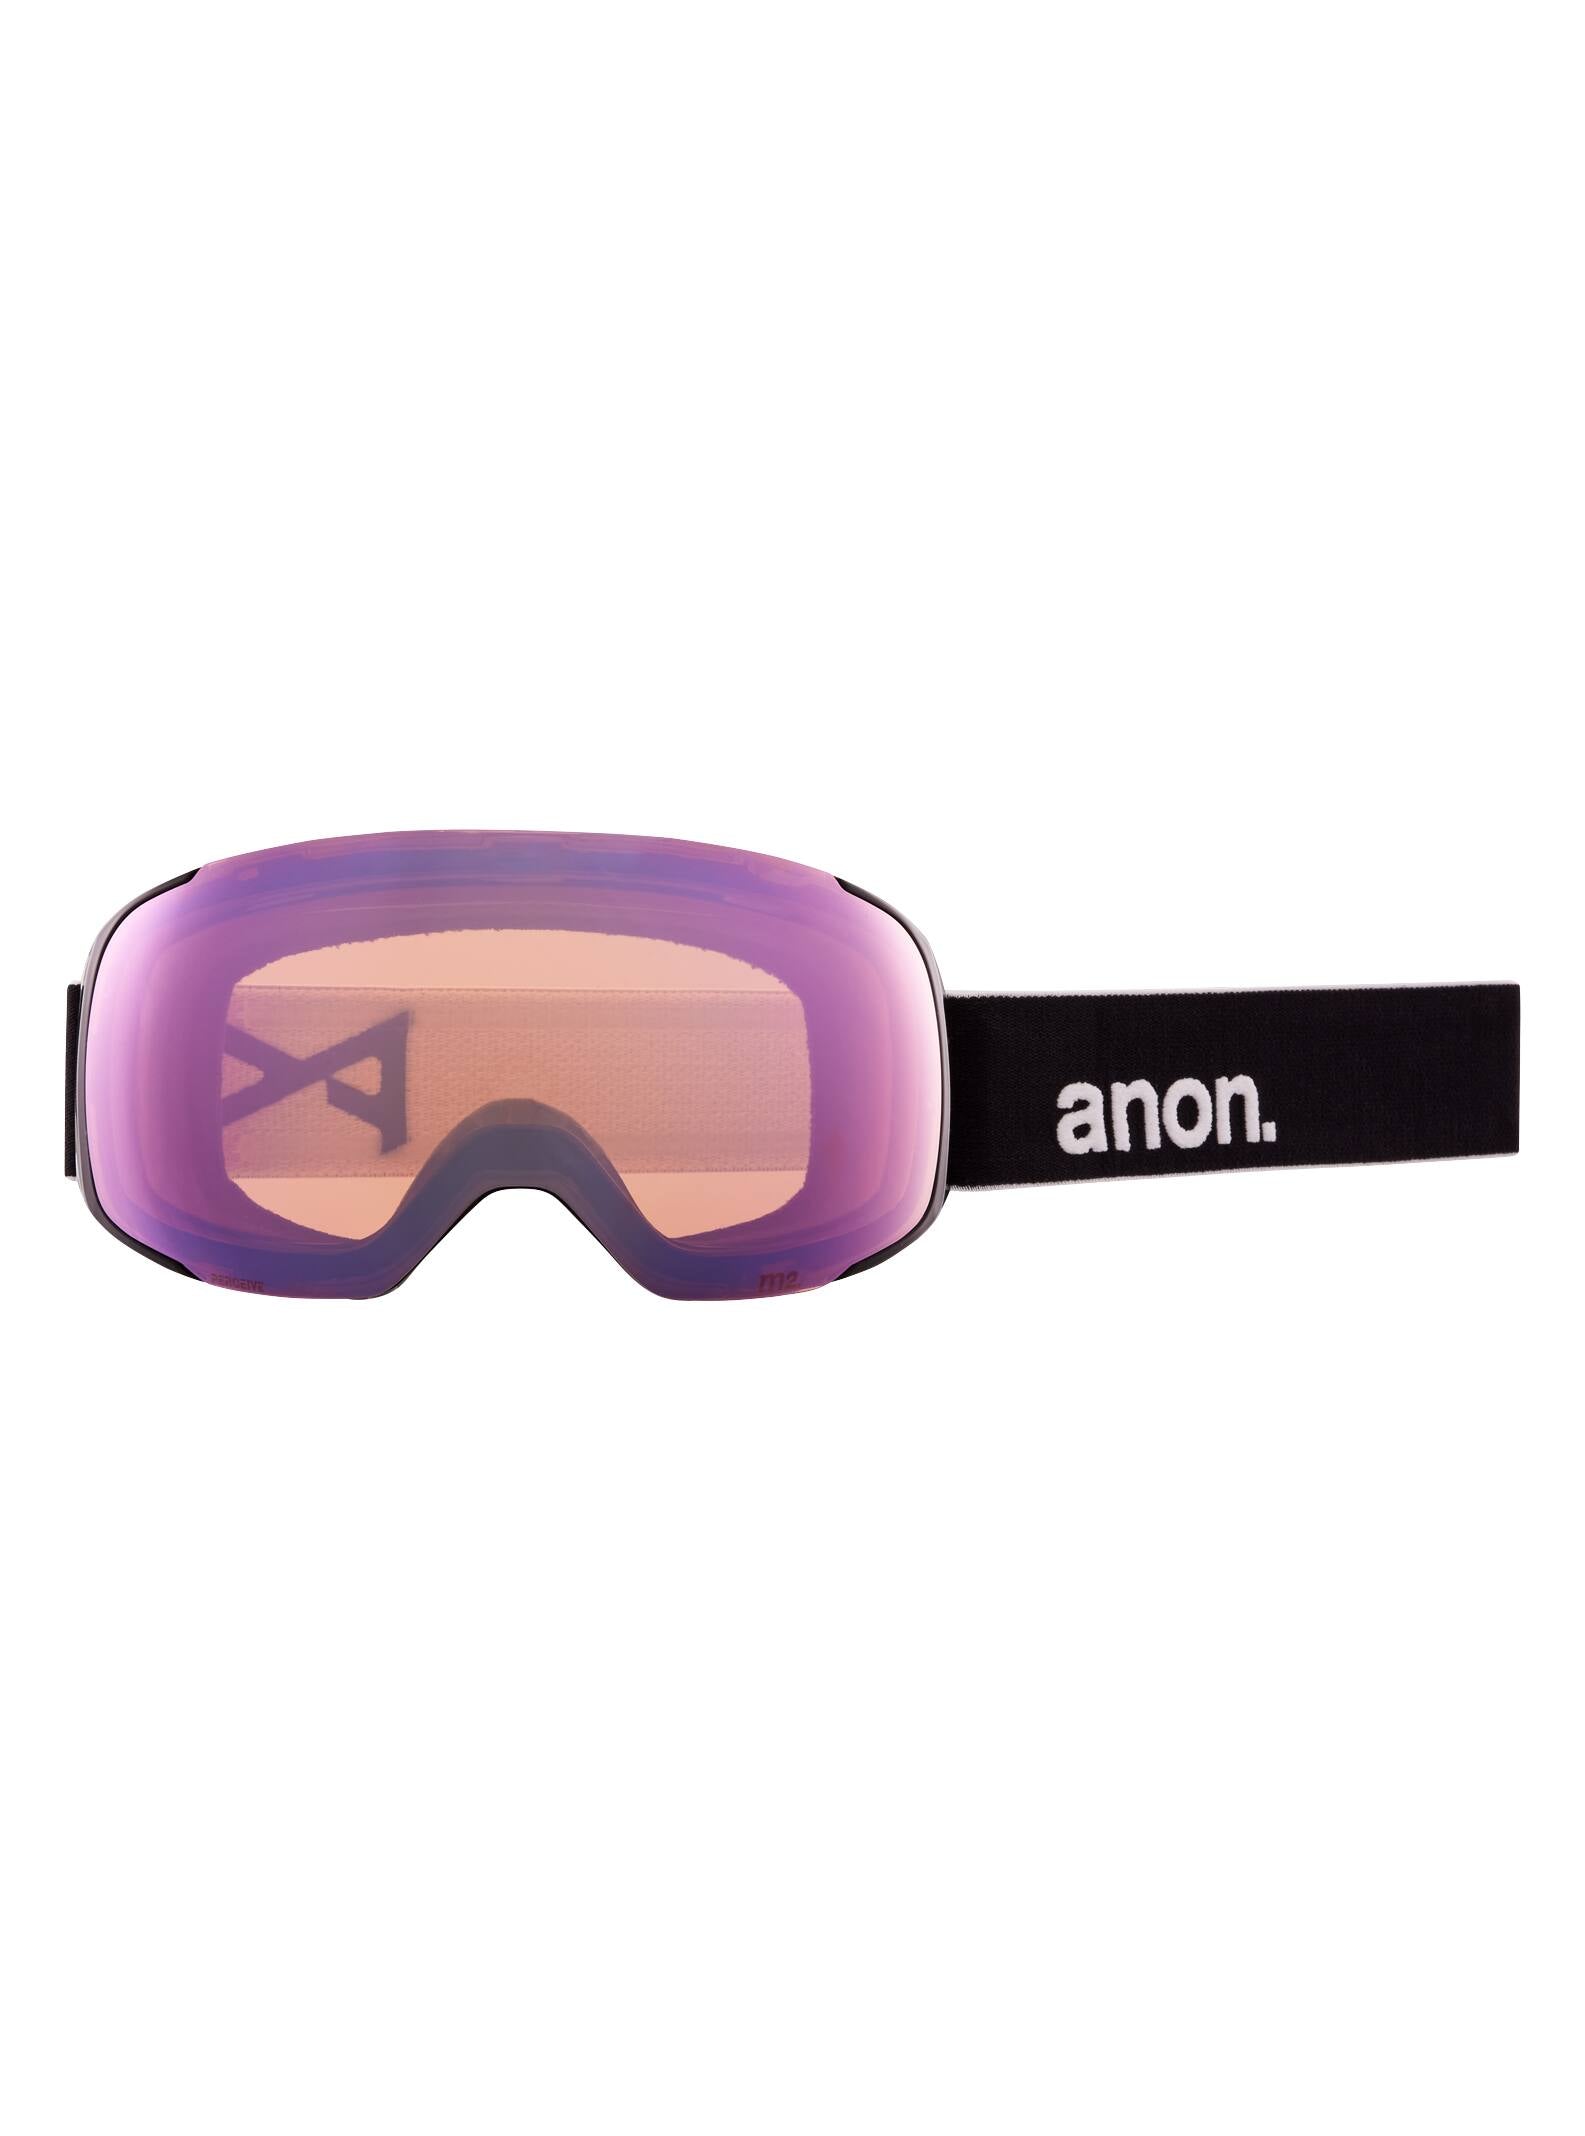 Anon Anon M2 Goggles + Bonus Lens + MFI® Face Mask Frame: black, lens: perceive variable green (22% / s2), spare lens: perceive cloudy pink (53% / s1)